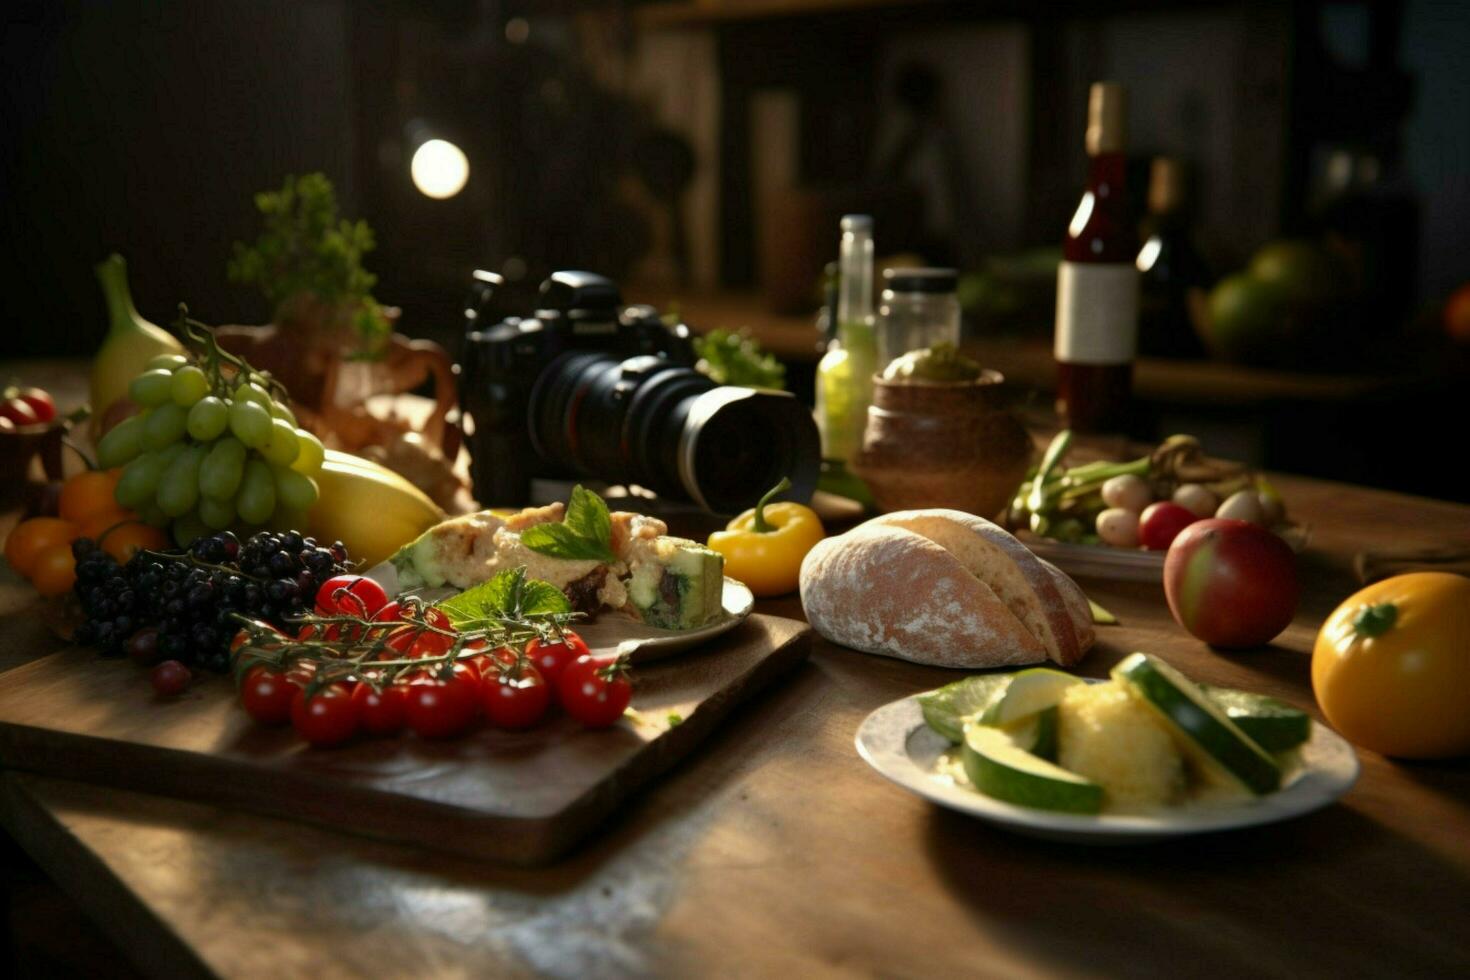 photorealistic professional food commercial photogr photo